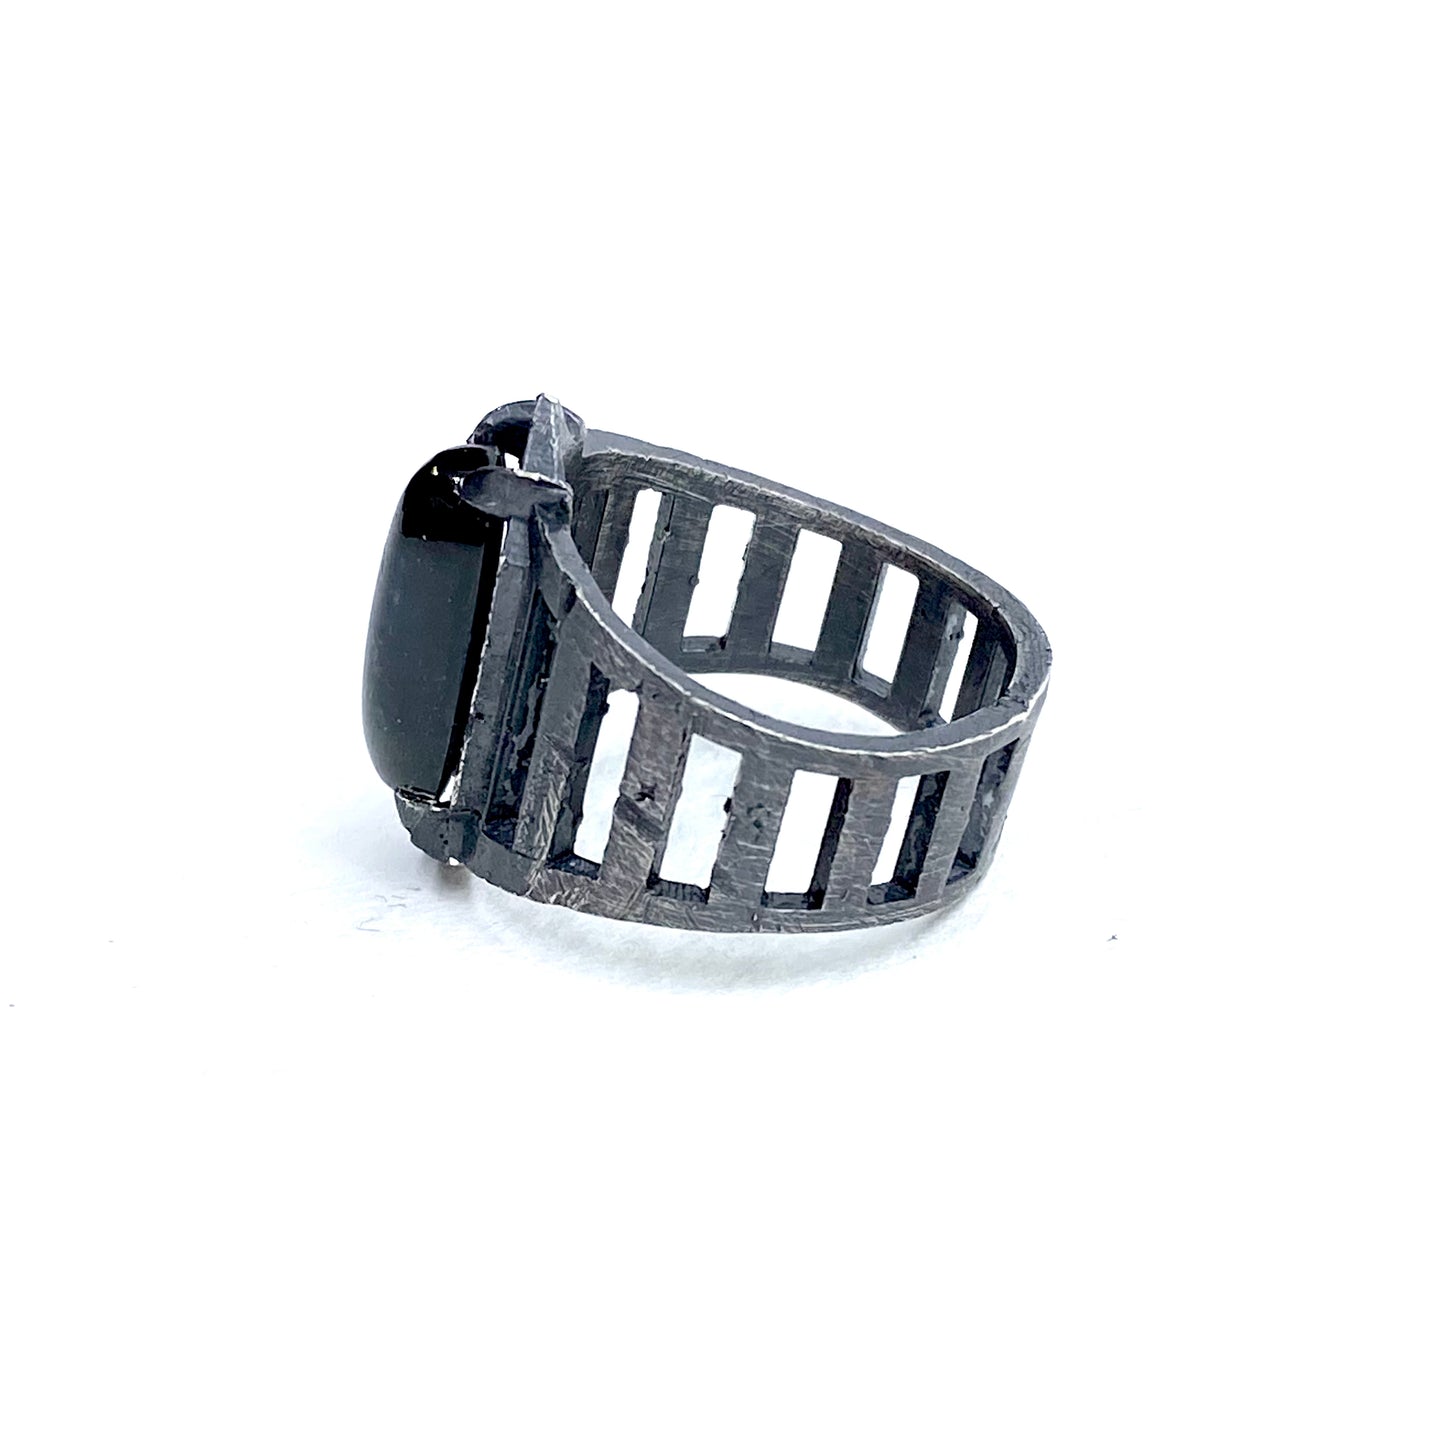 Brutalist Ring with Tourmaline in Sterling Silver